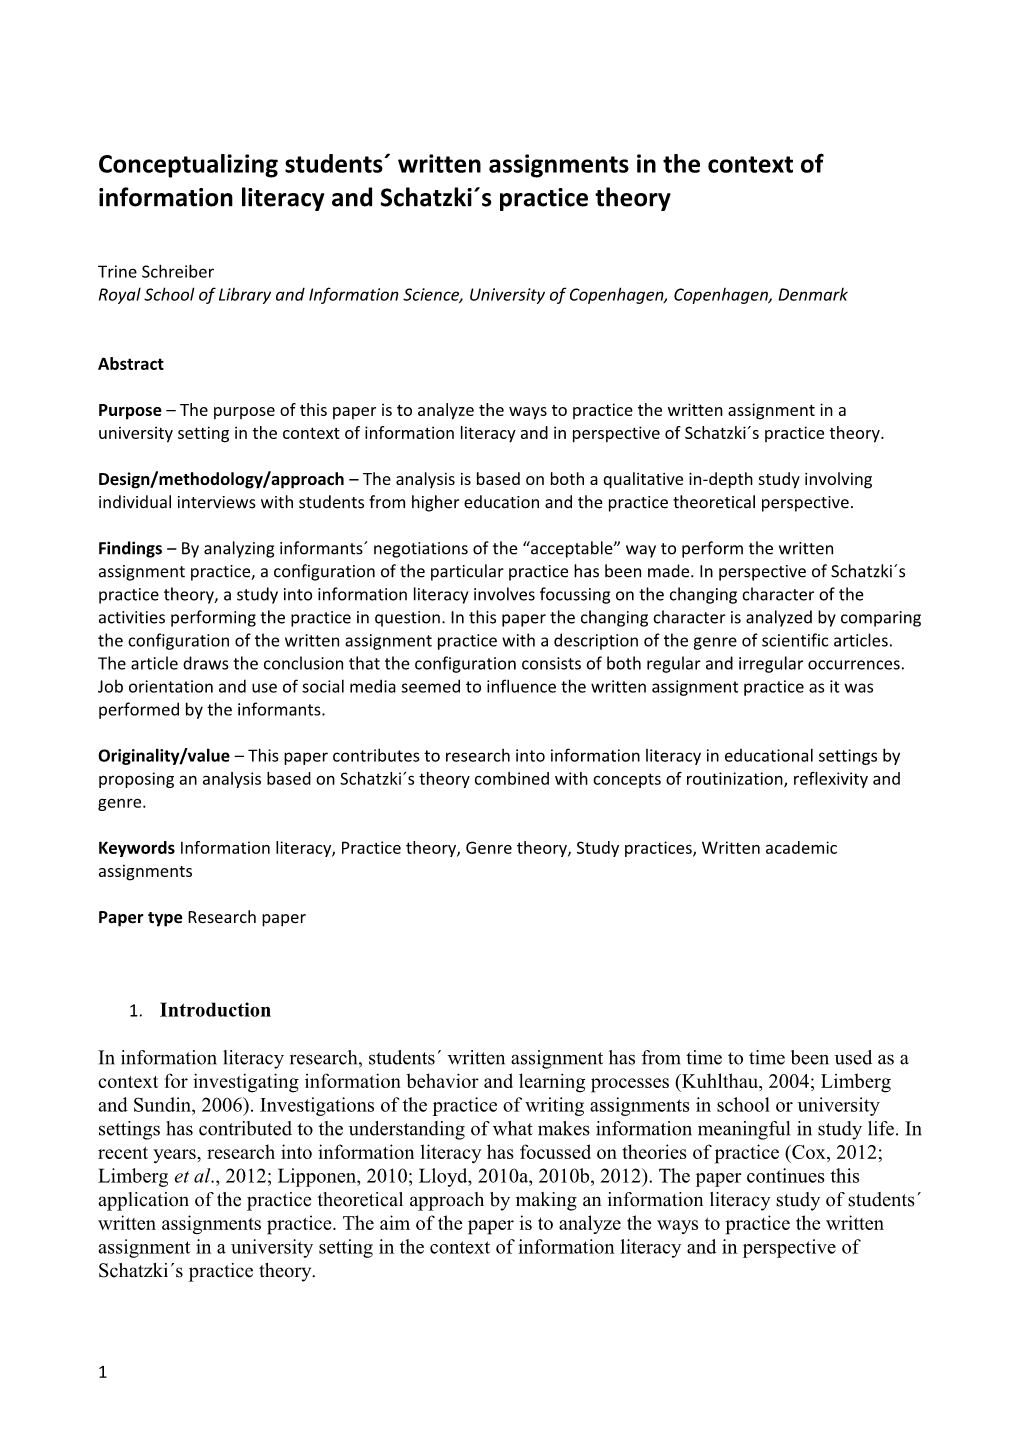 Conceptualizing Students Written Assignments in the Context of Information Literacy And